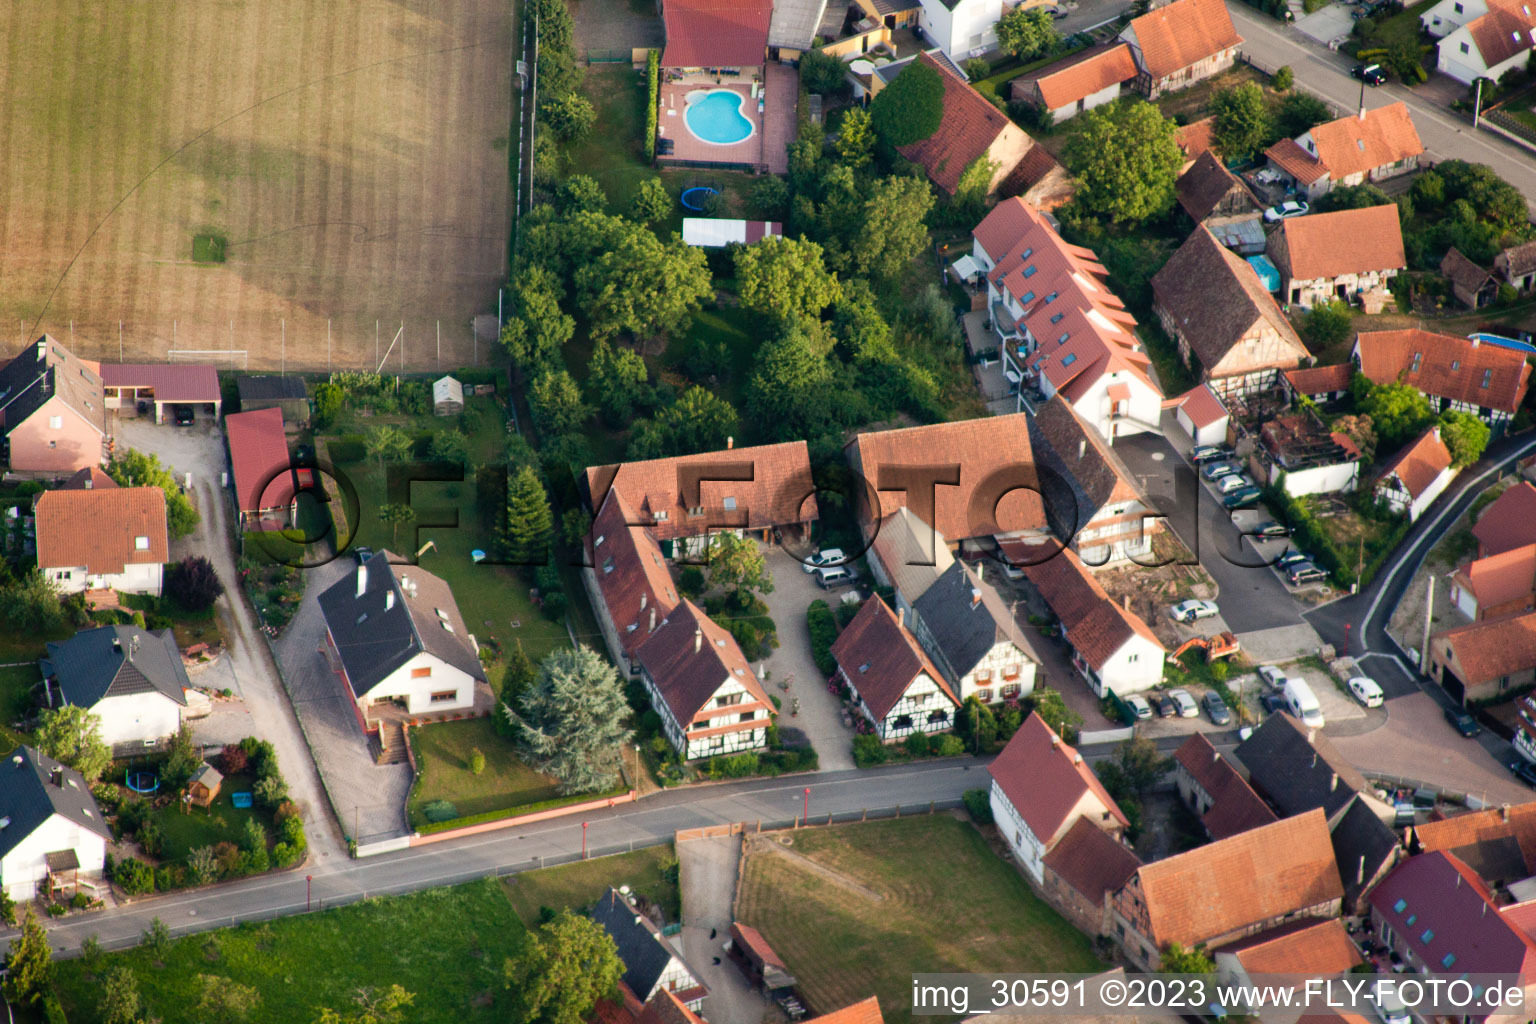 Drone image of Forstfeld in the state Bas-Rhin, France